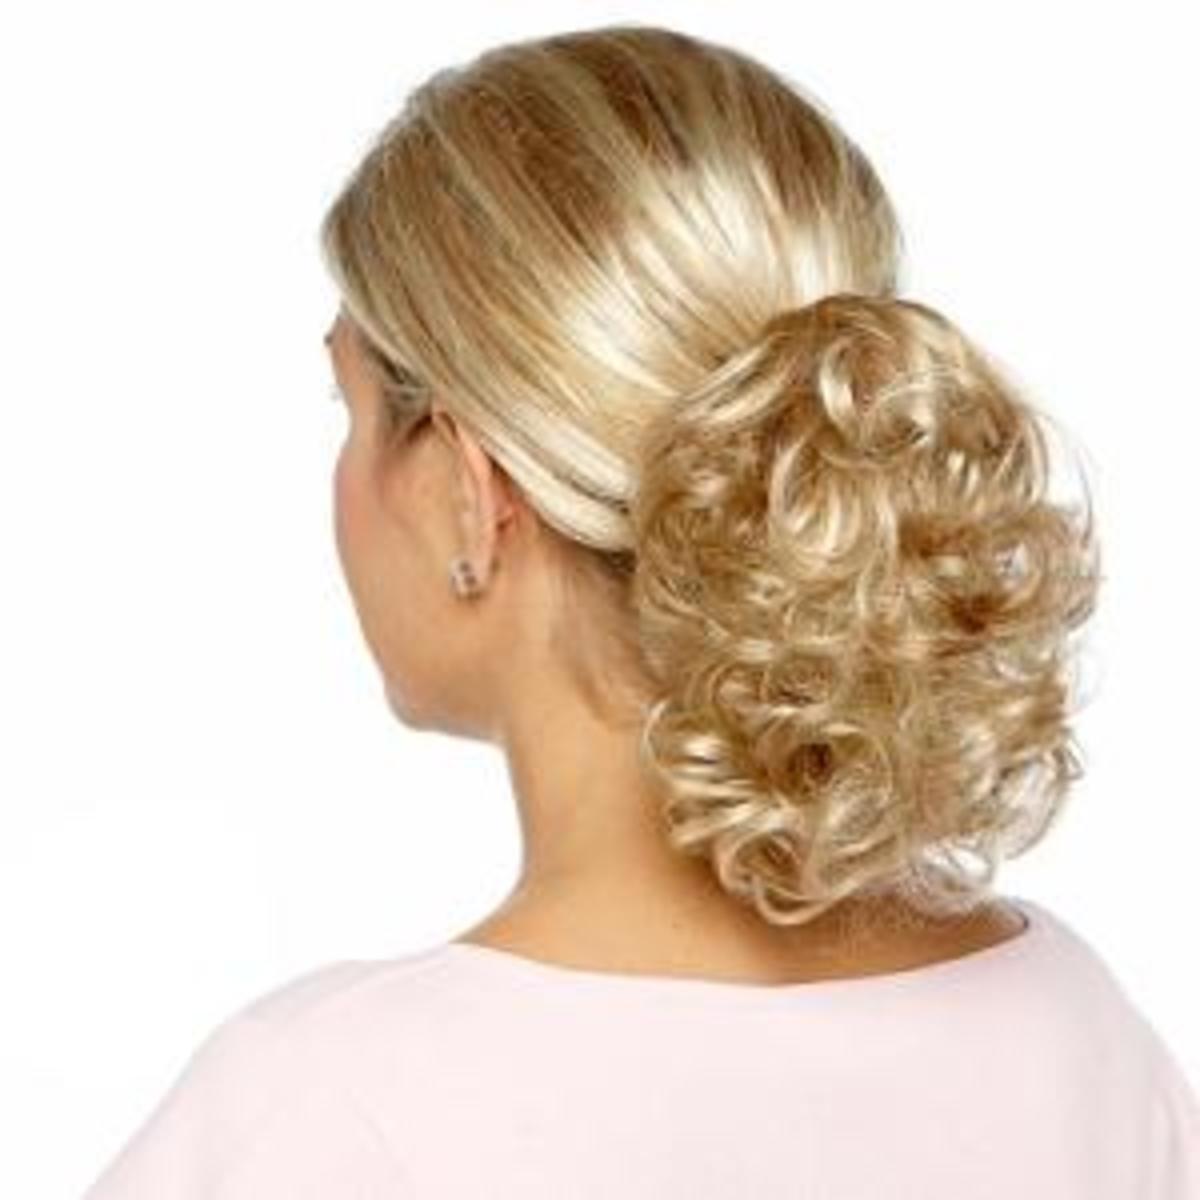 ringlet-hairstyles--a-look-back-and-their-continuing-popularity